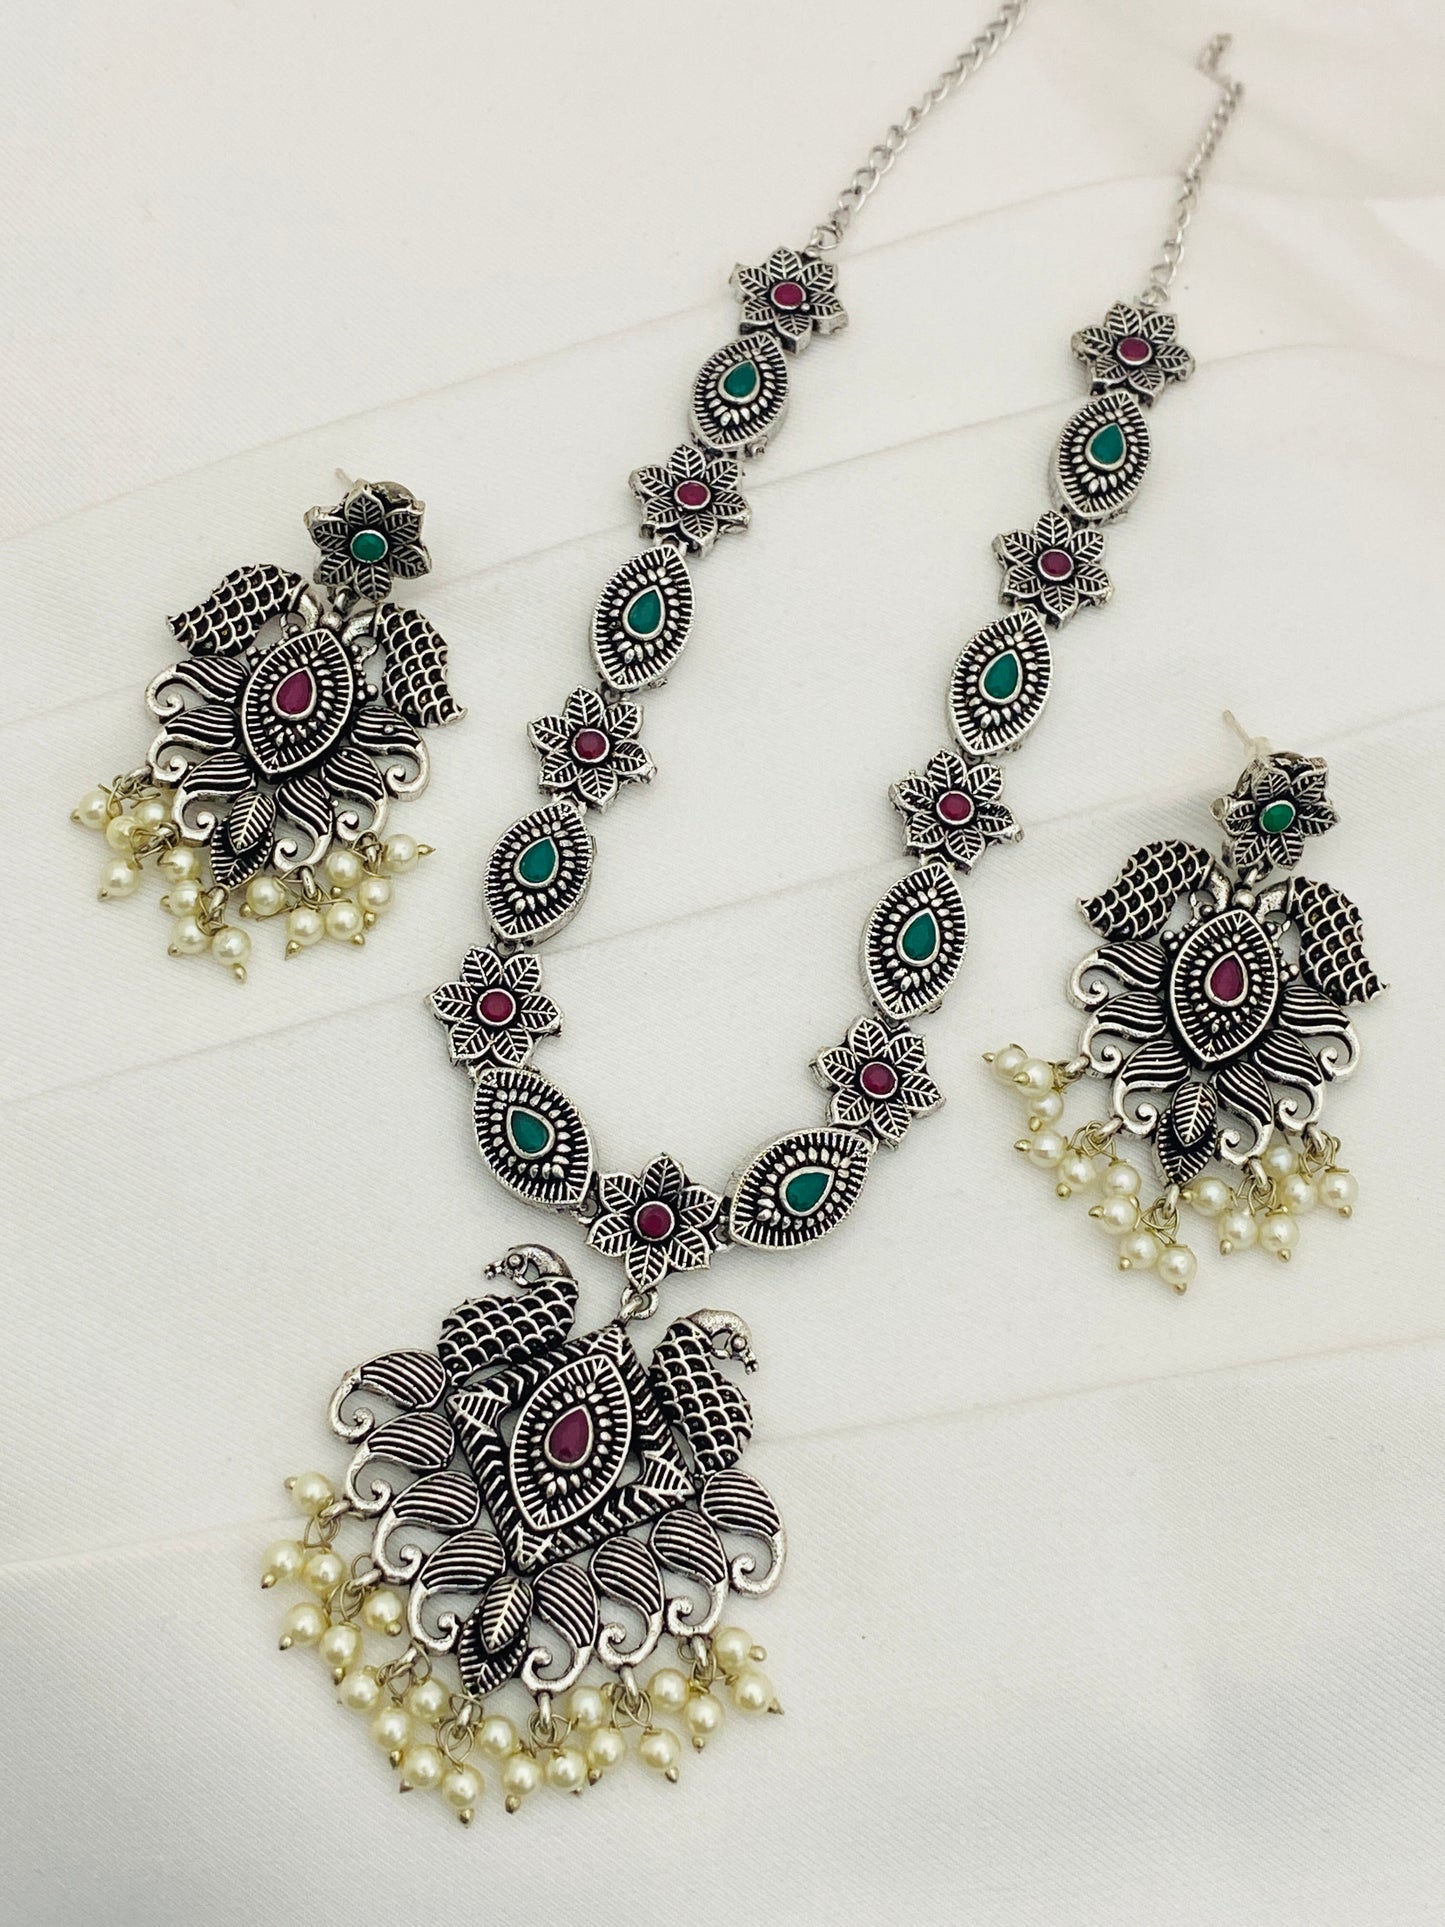 Multi Color Stone Studded Peacock Floral Designed Silver Toned Oxidized Necklace With Earrings in Yuma